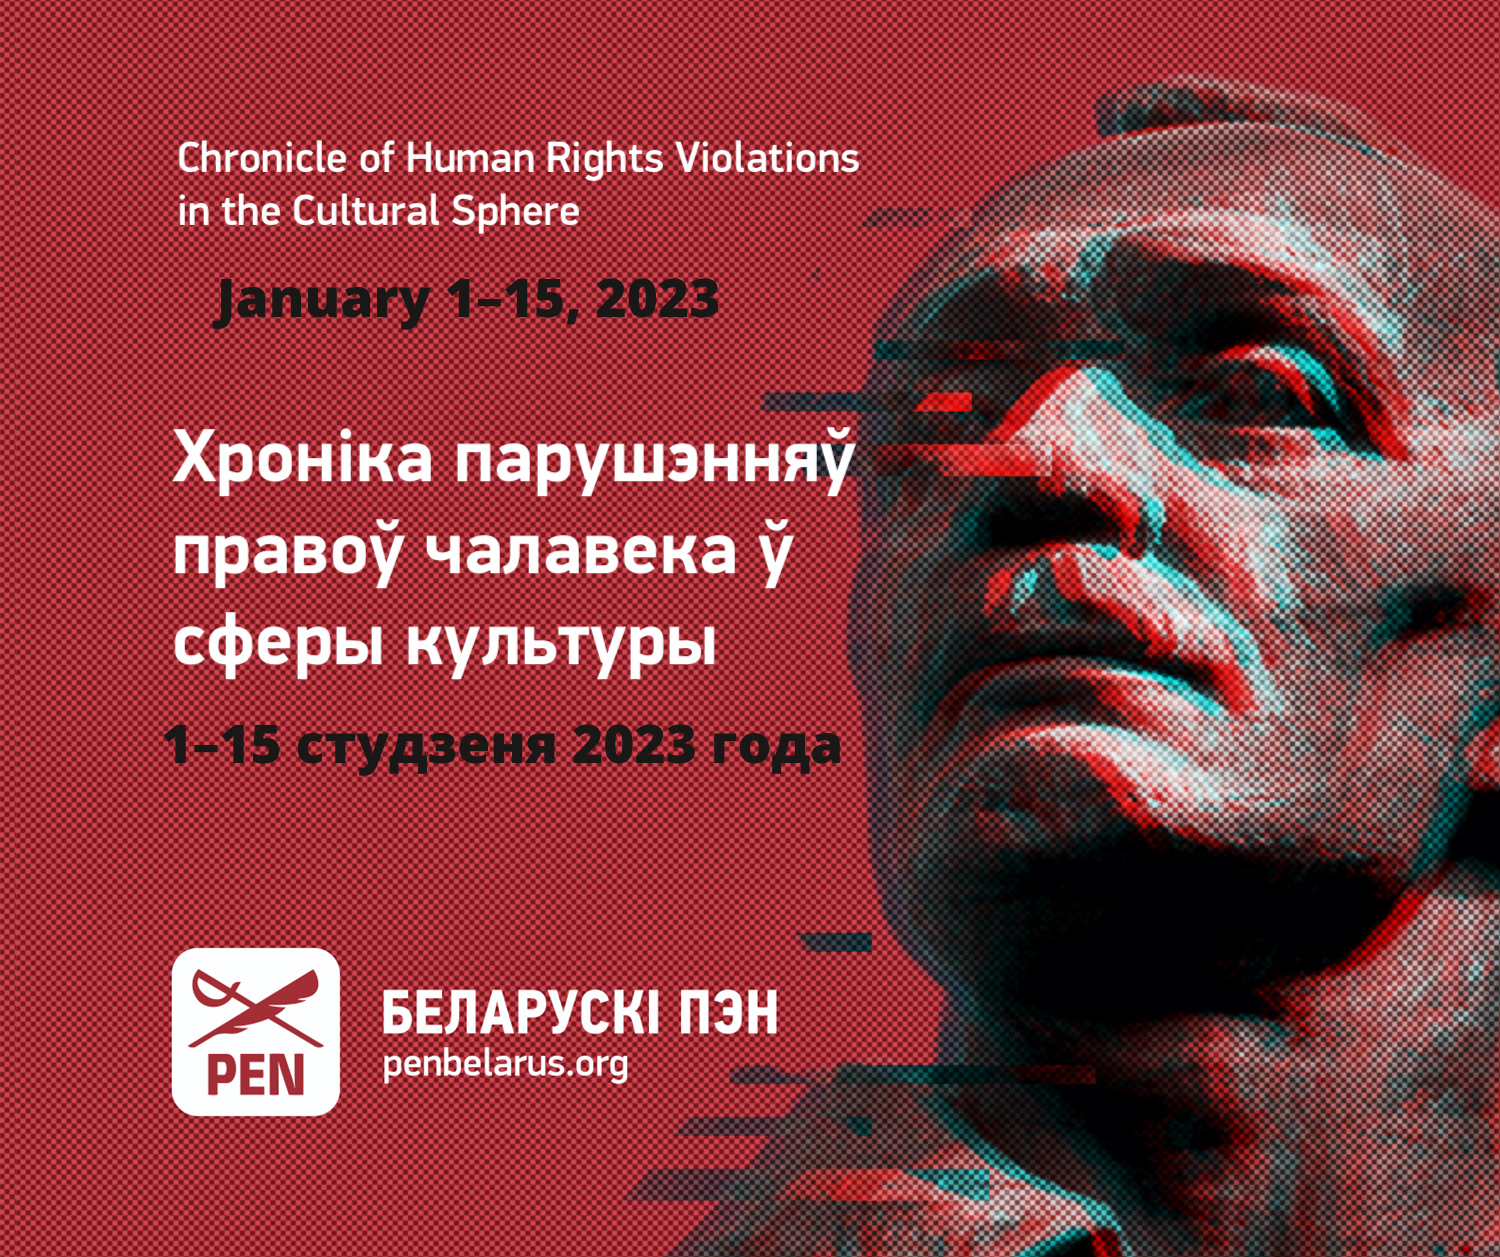 Chronicle of violations of human rights in the cultural sphere (January 1-15, 2023)